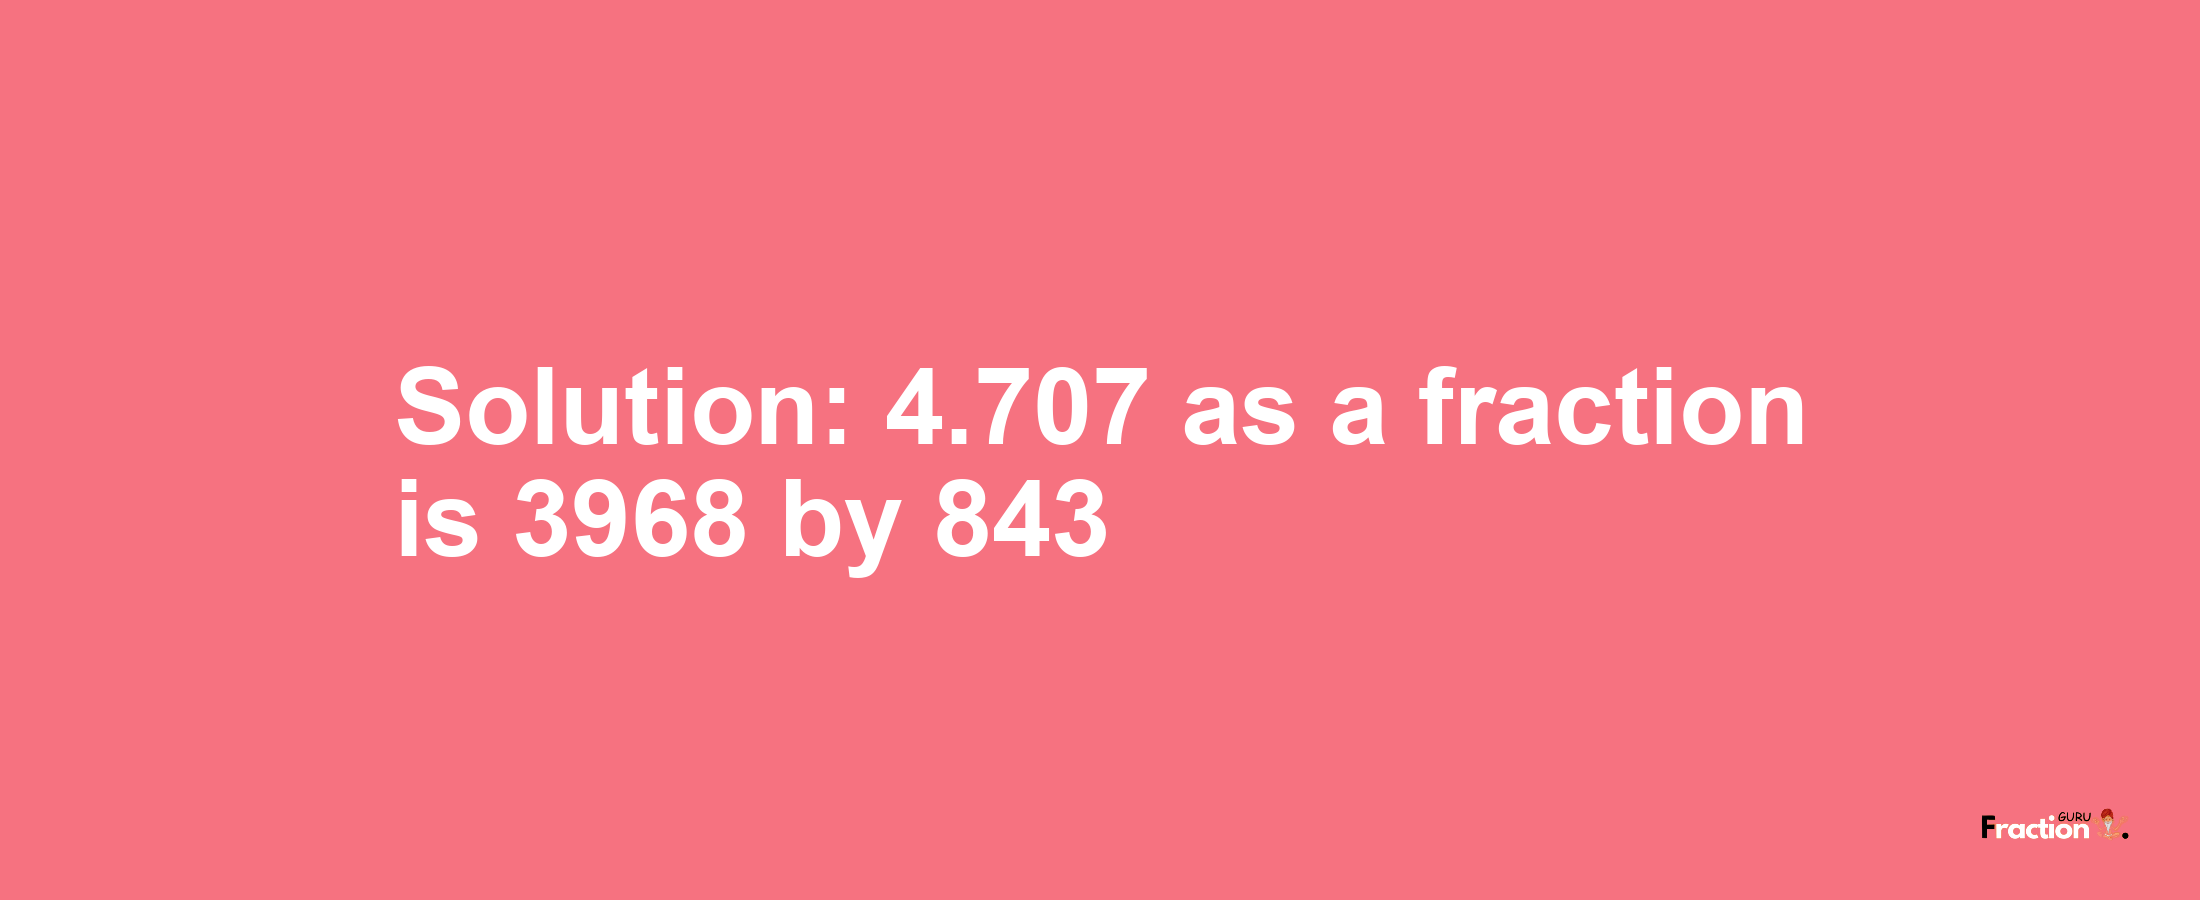 Solution:4.707 as a fraction is 3968/843